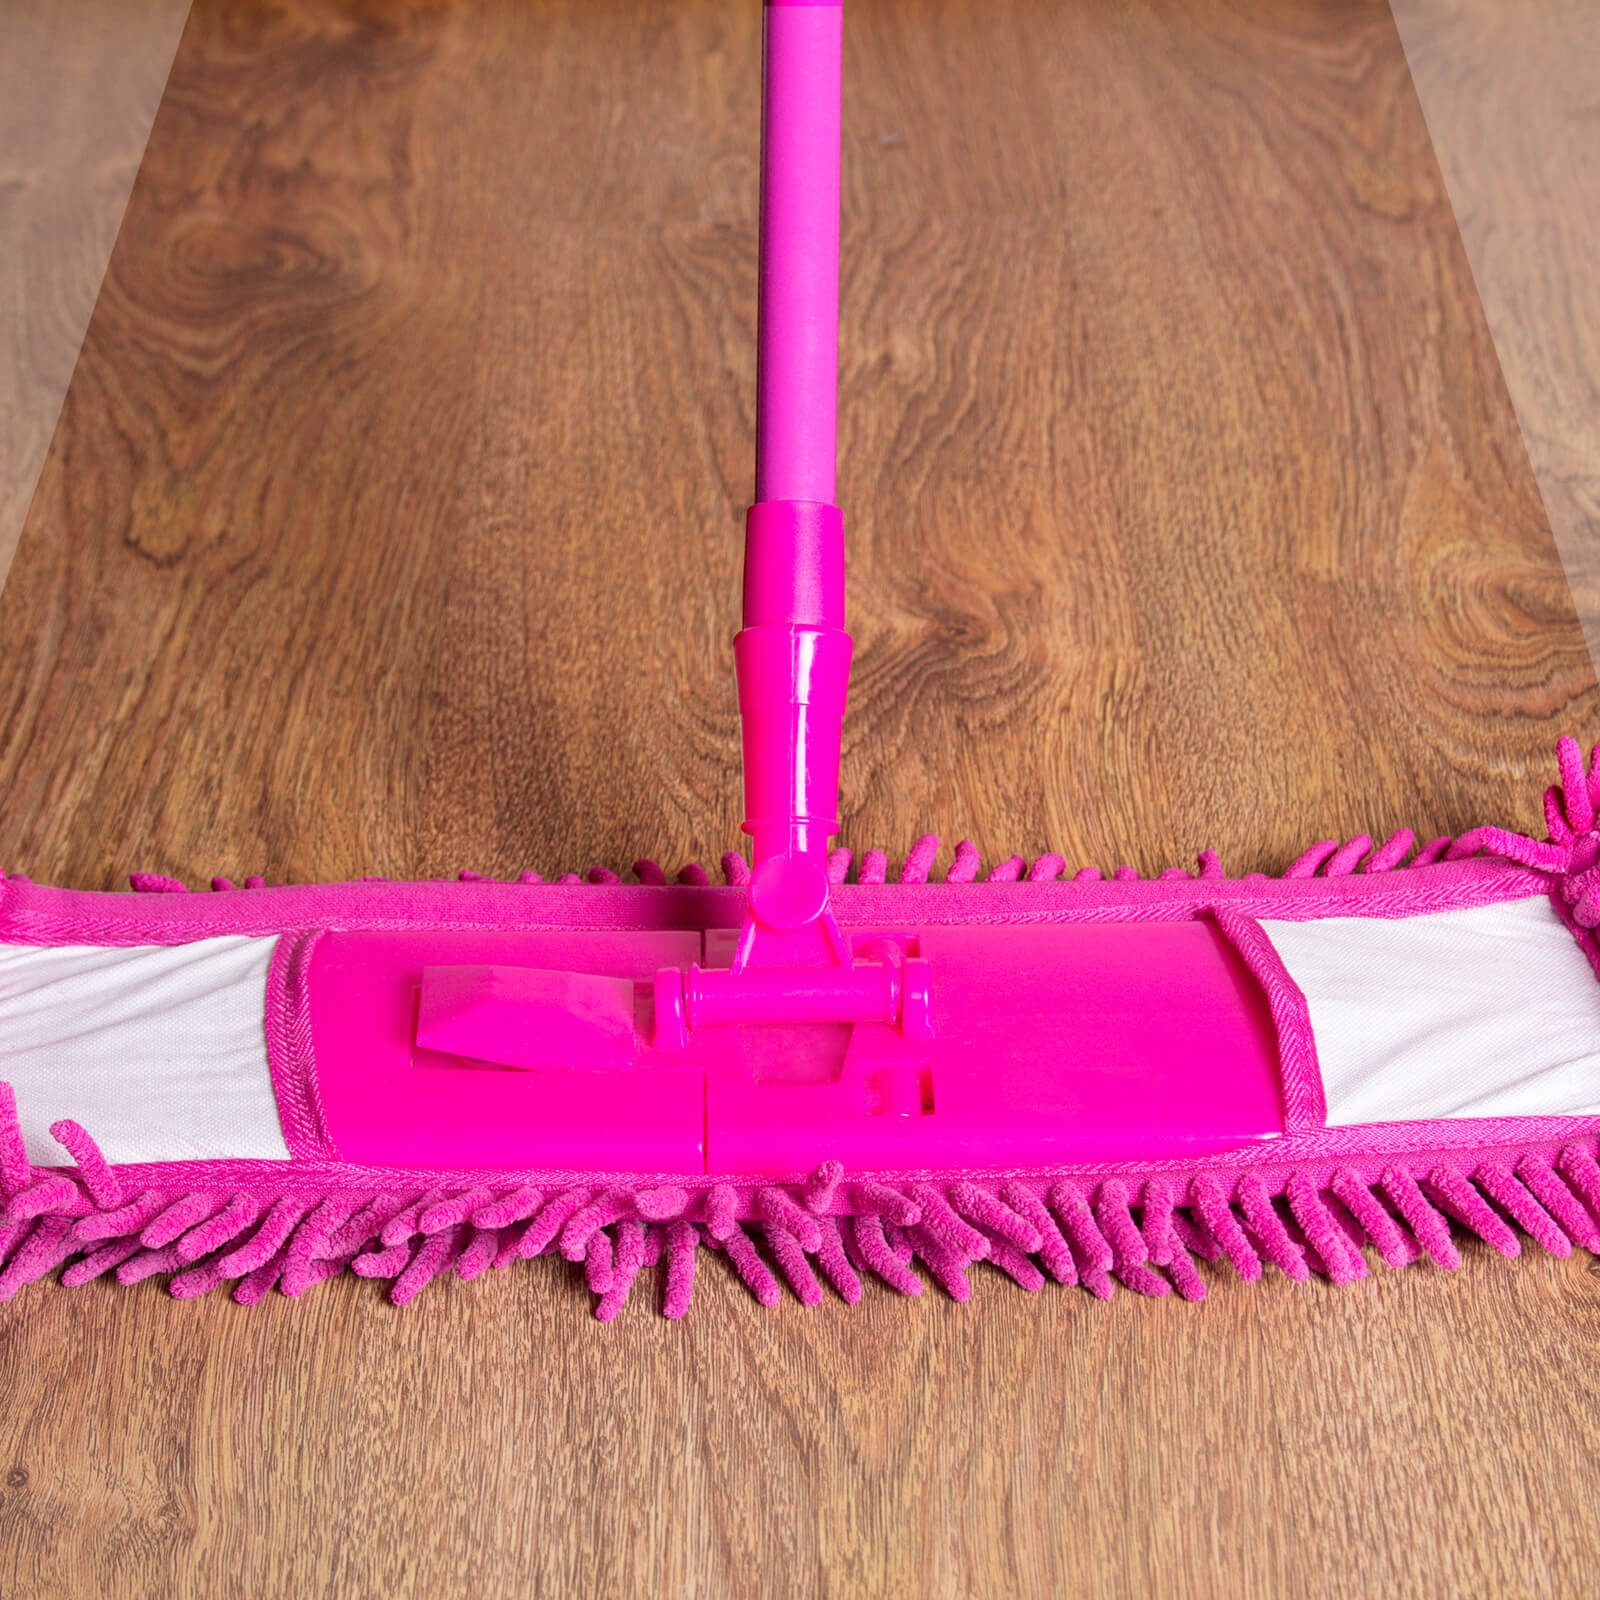 Laminate cleaning tips | All Floors & More